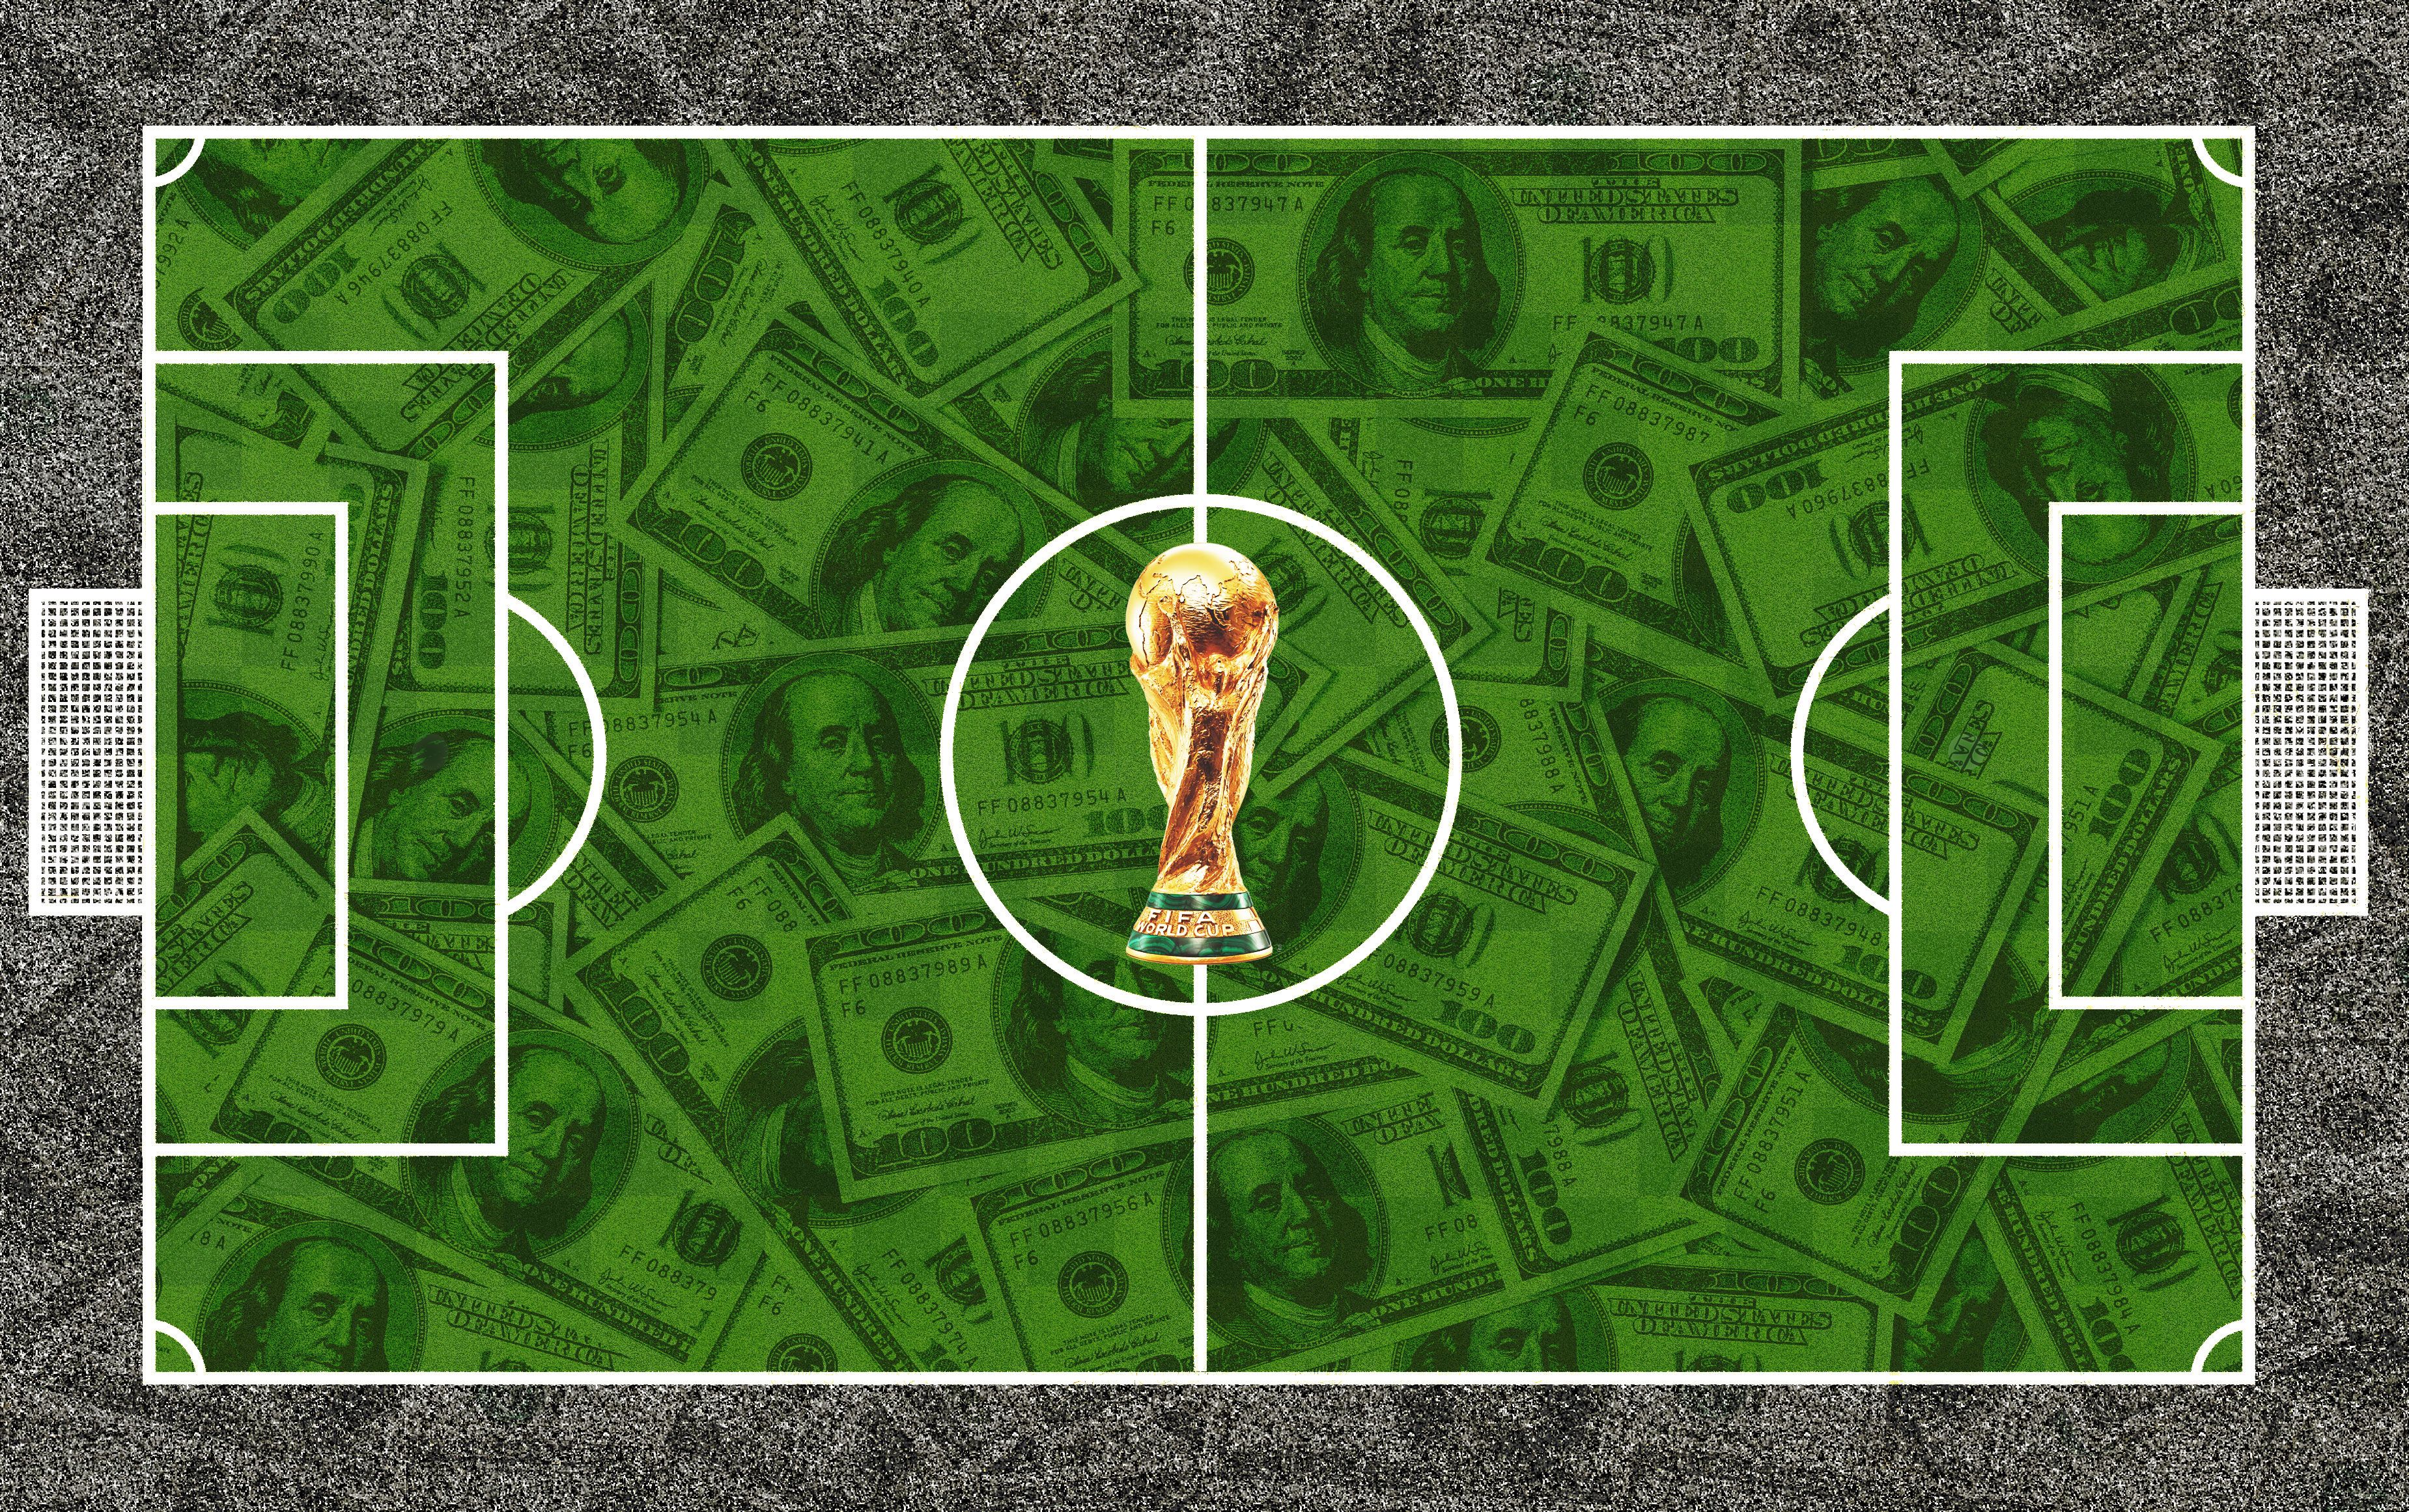 What the World Cup can teach us about game theory - Marketplace